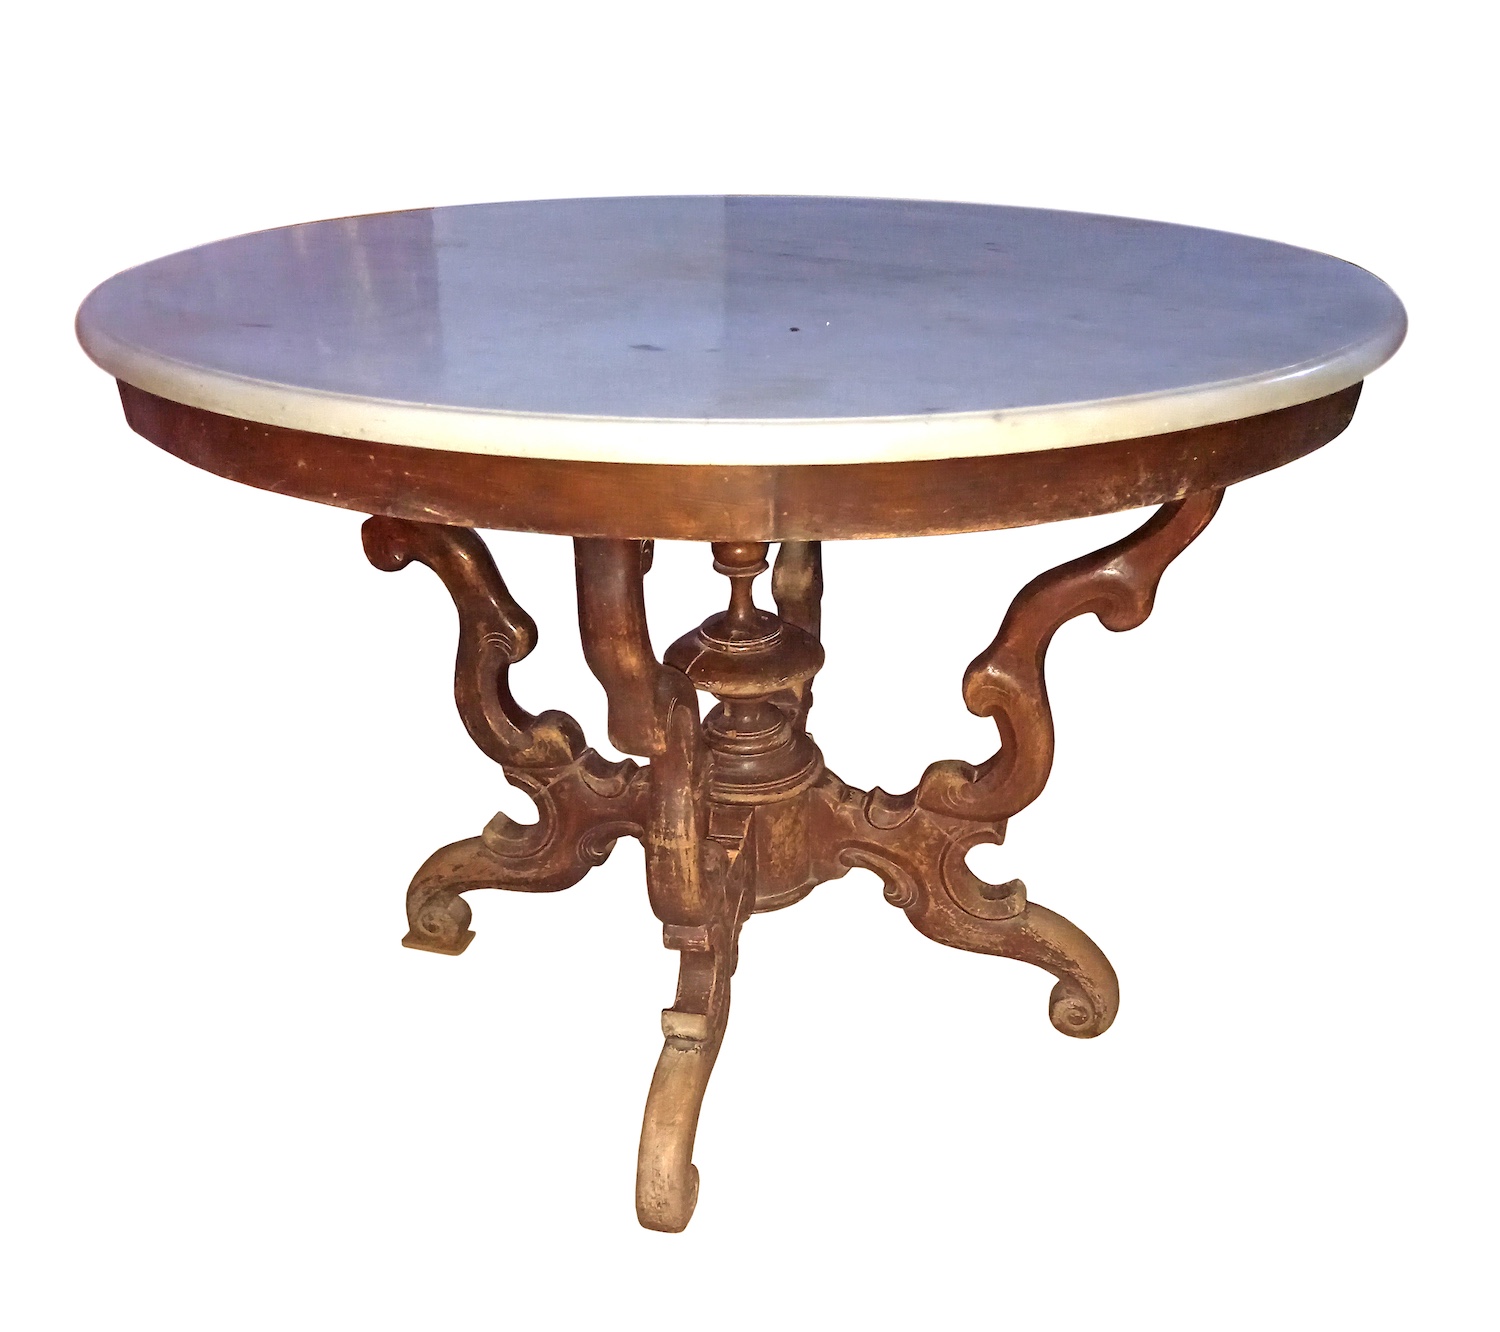 A late 19th - early 20th century carved teak table with marble top